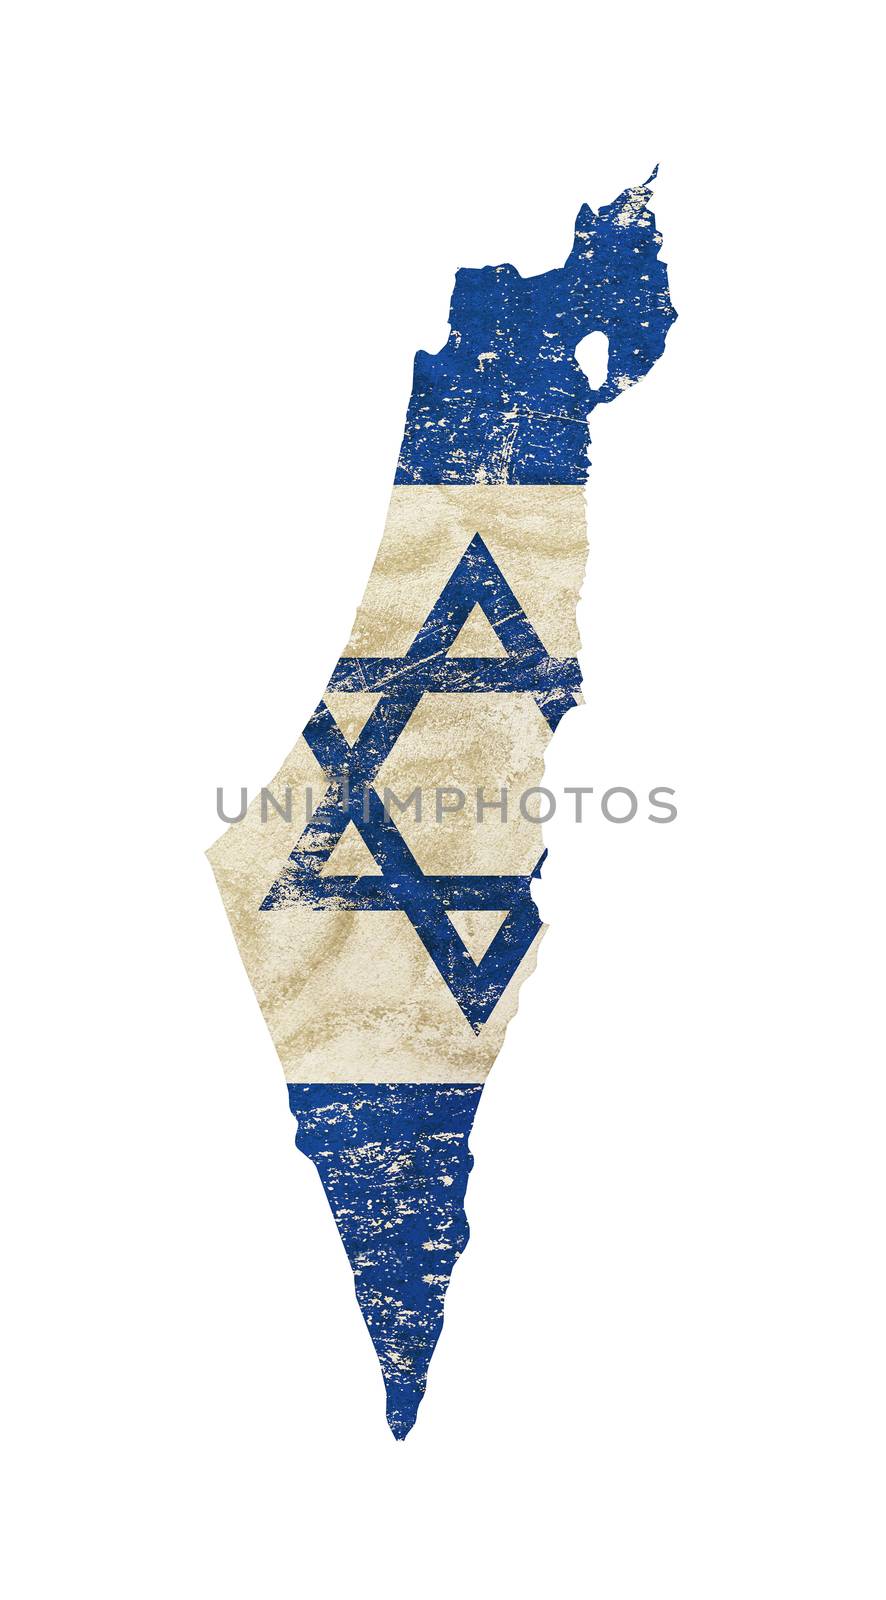 Old grunge vintage dirty faded shabby distressed Israel flag of white background with blue Star of Judah (Magen David)